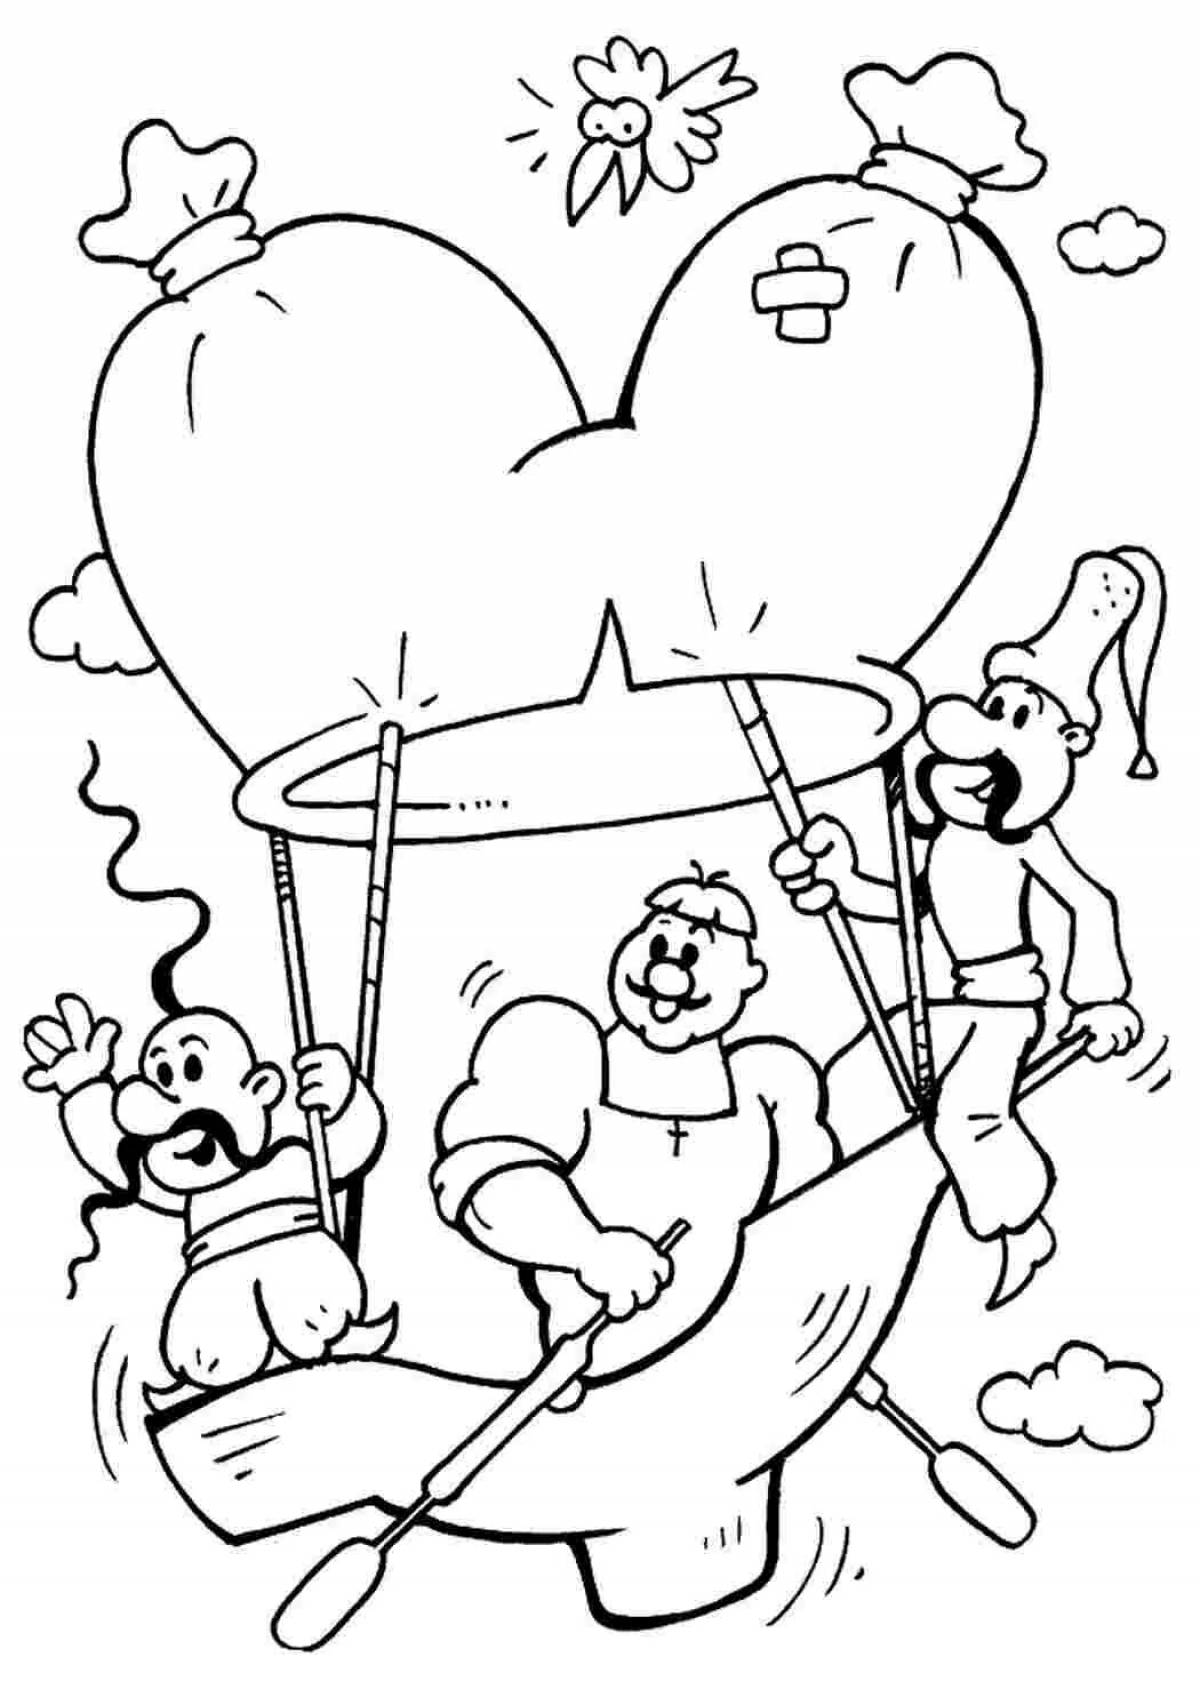 Cossacks coloring pages for beginners